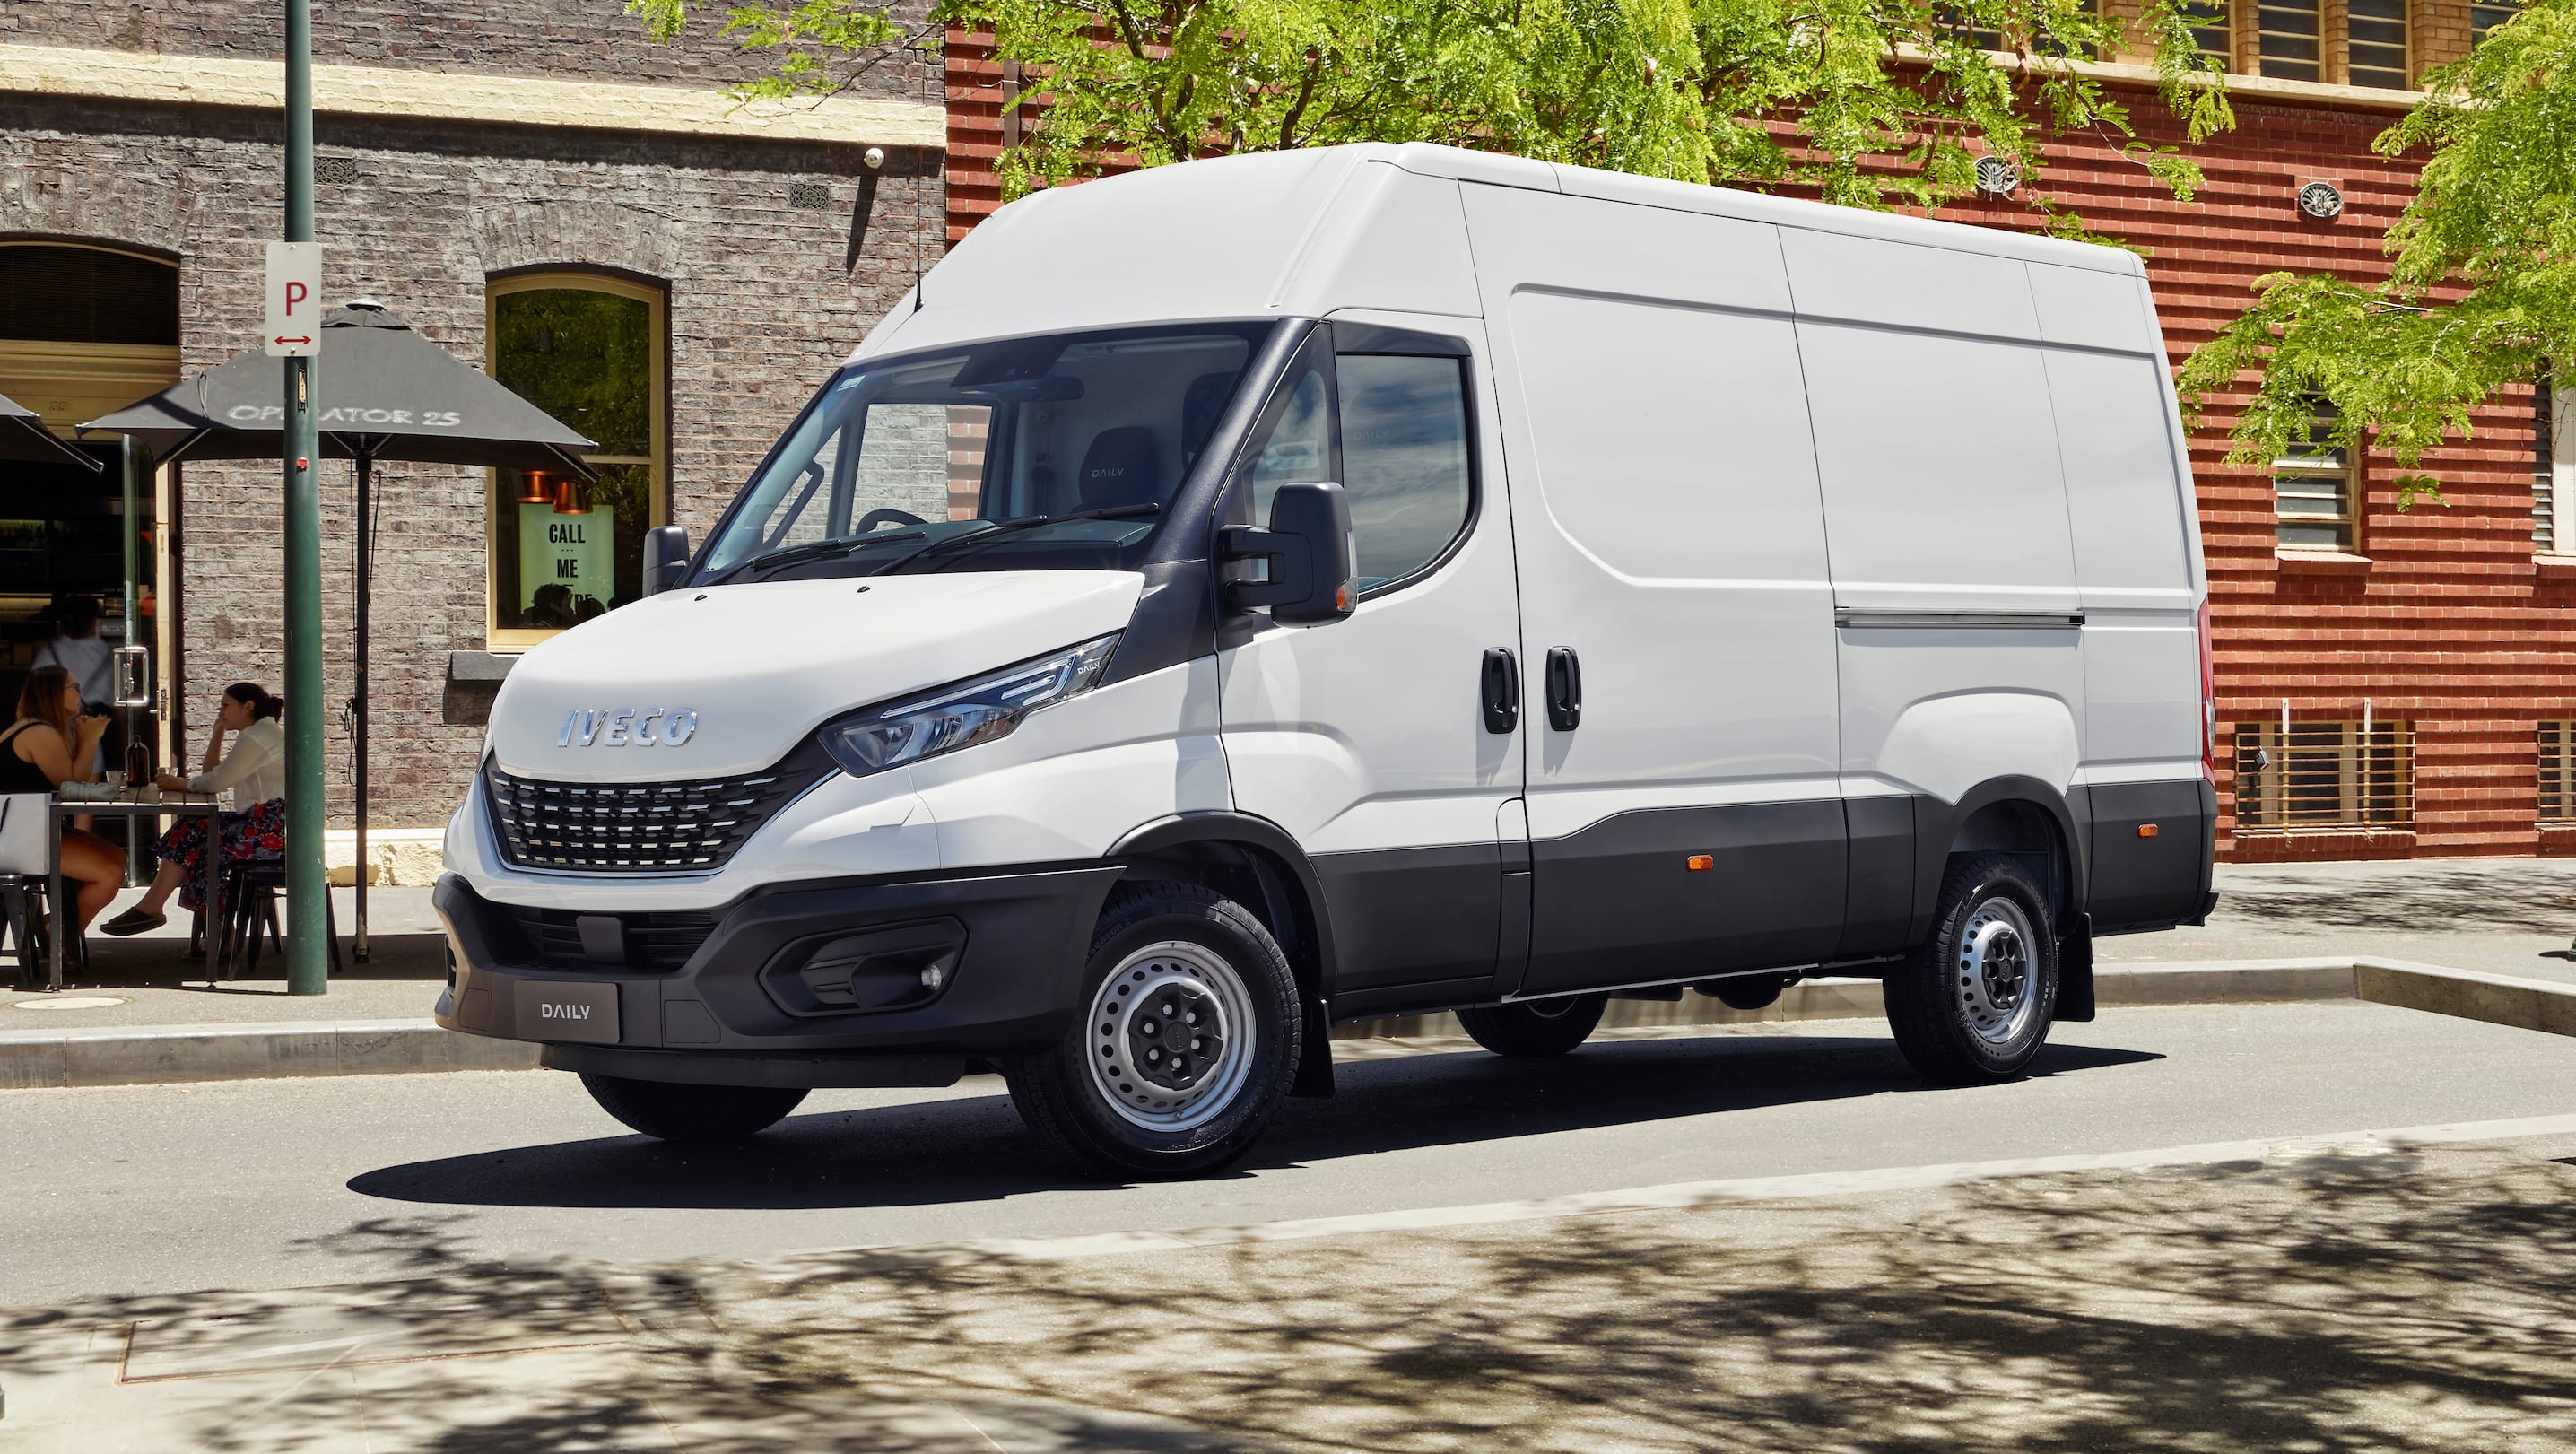 2021 Iveco Daily makes UK debut at ITT Hub commercial vehicle show